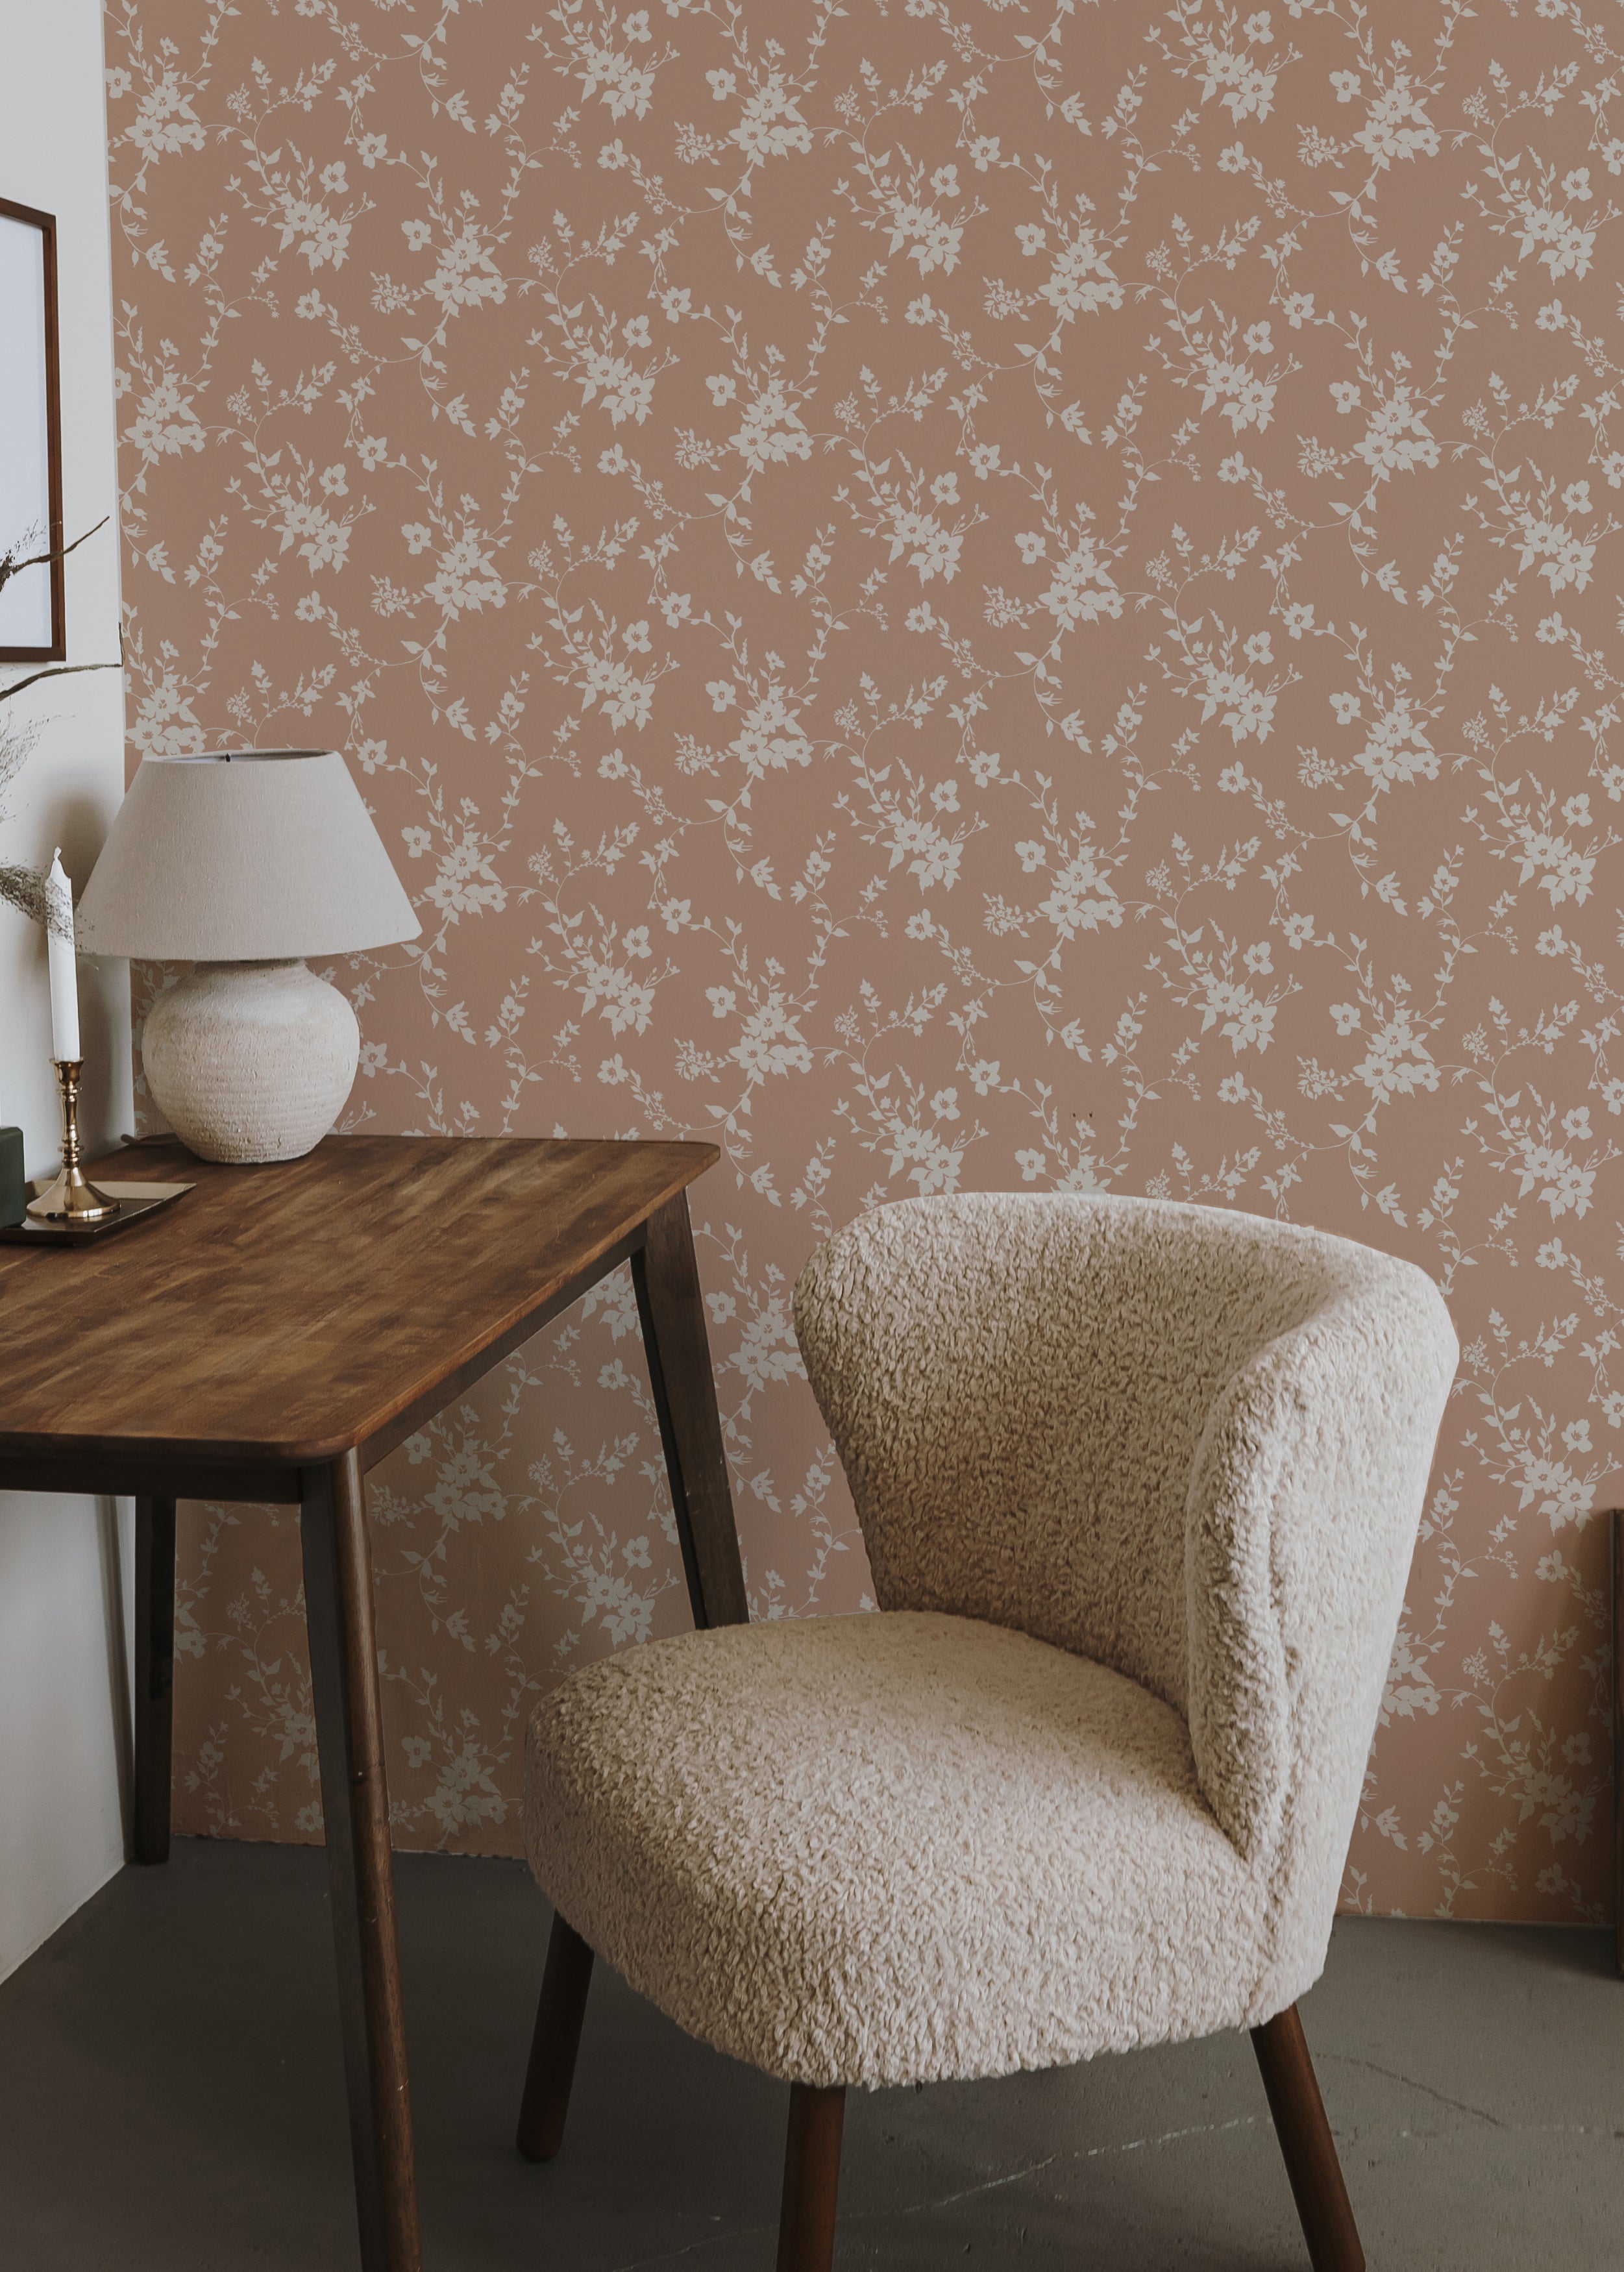 A cozy corner of a room featuring a plush beige chair and a wooden table with a lamp, set against a backdrop of soft pink wallpaper with white floral patterns, conveying a warm and inviting atmosphere.